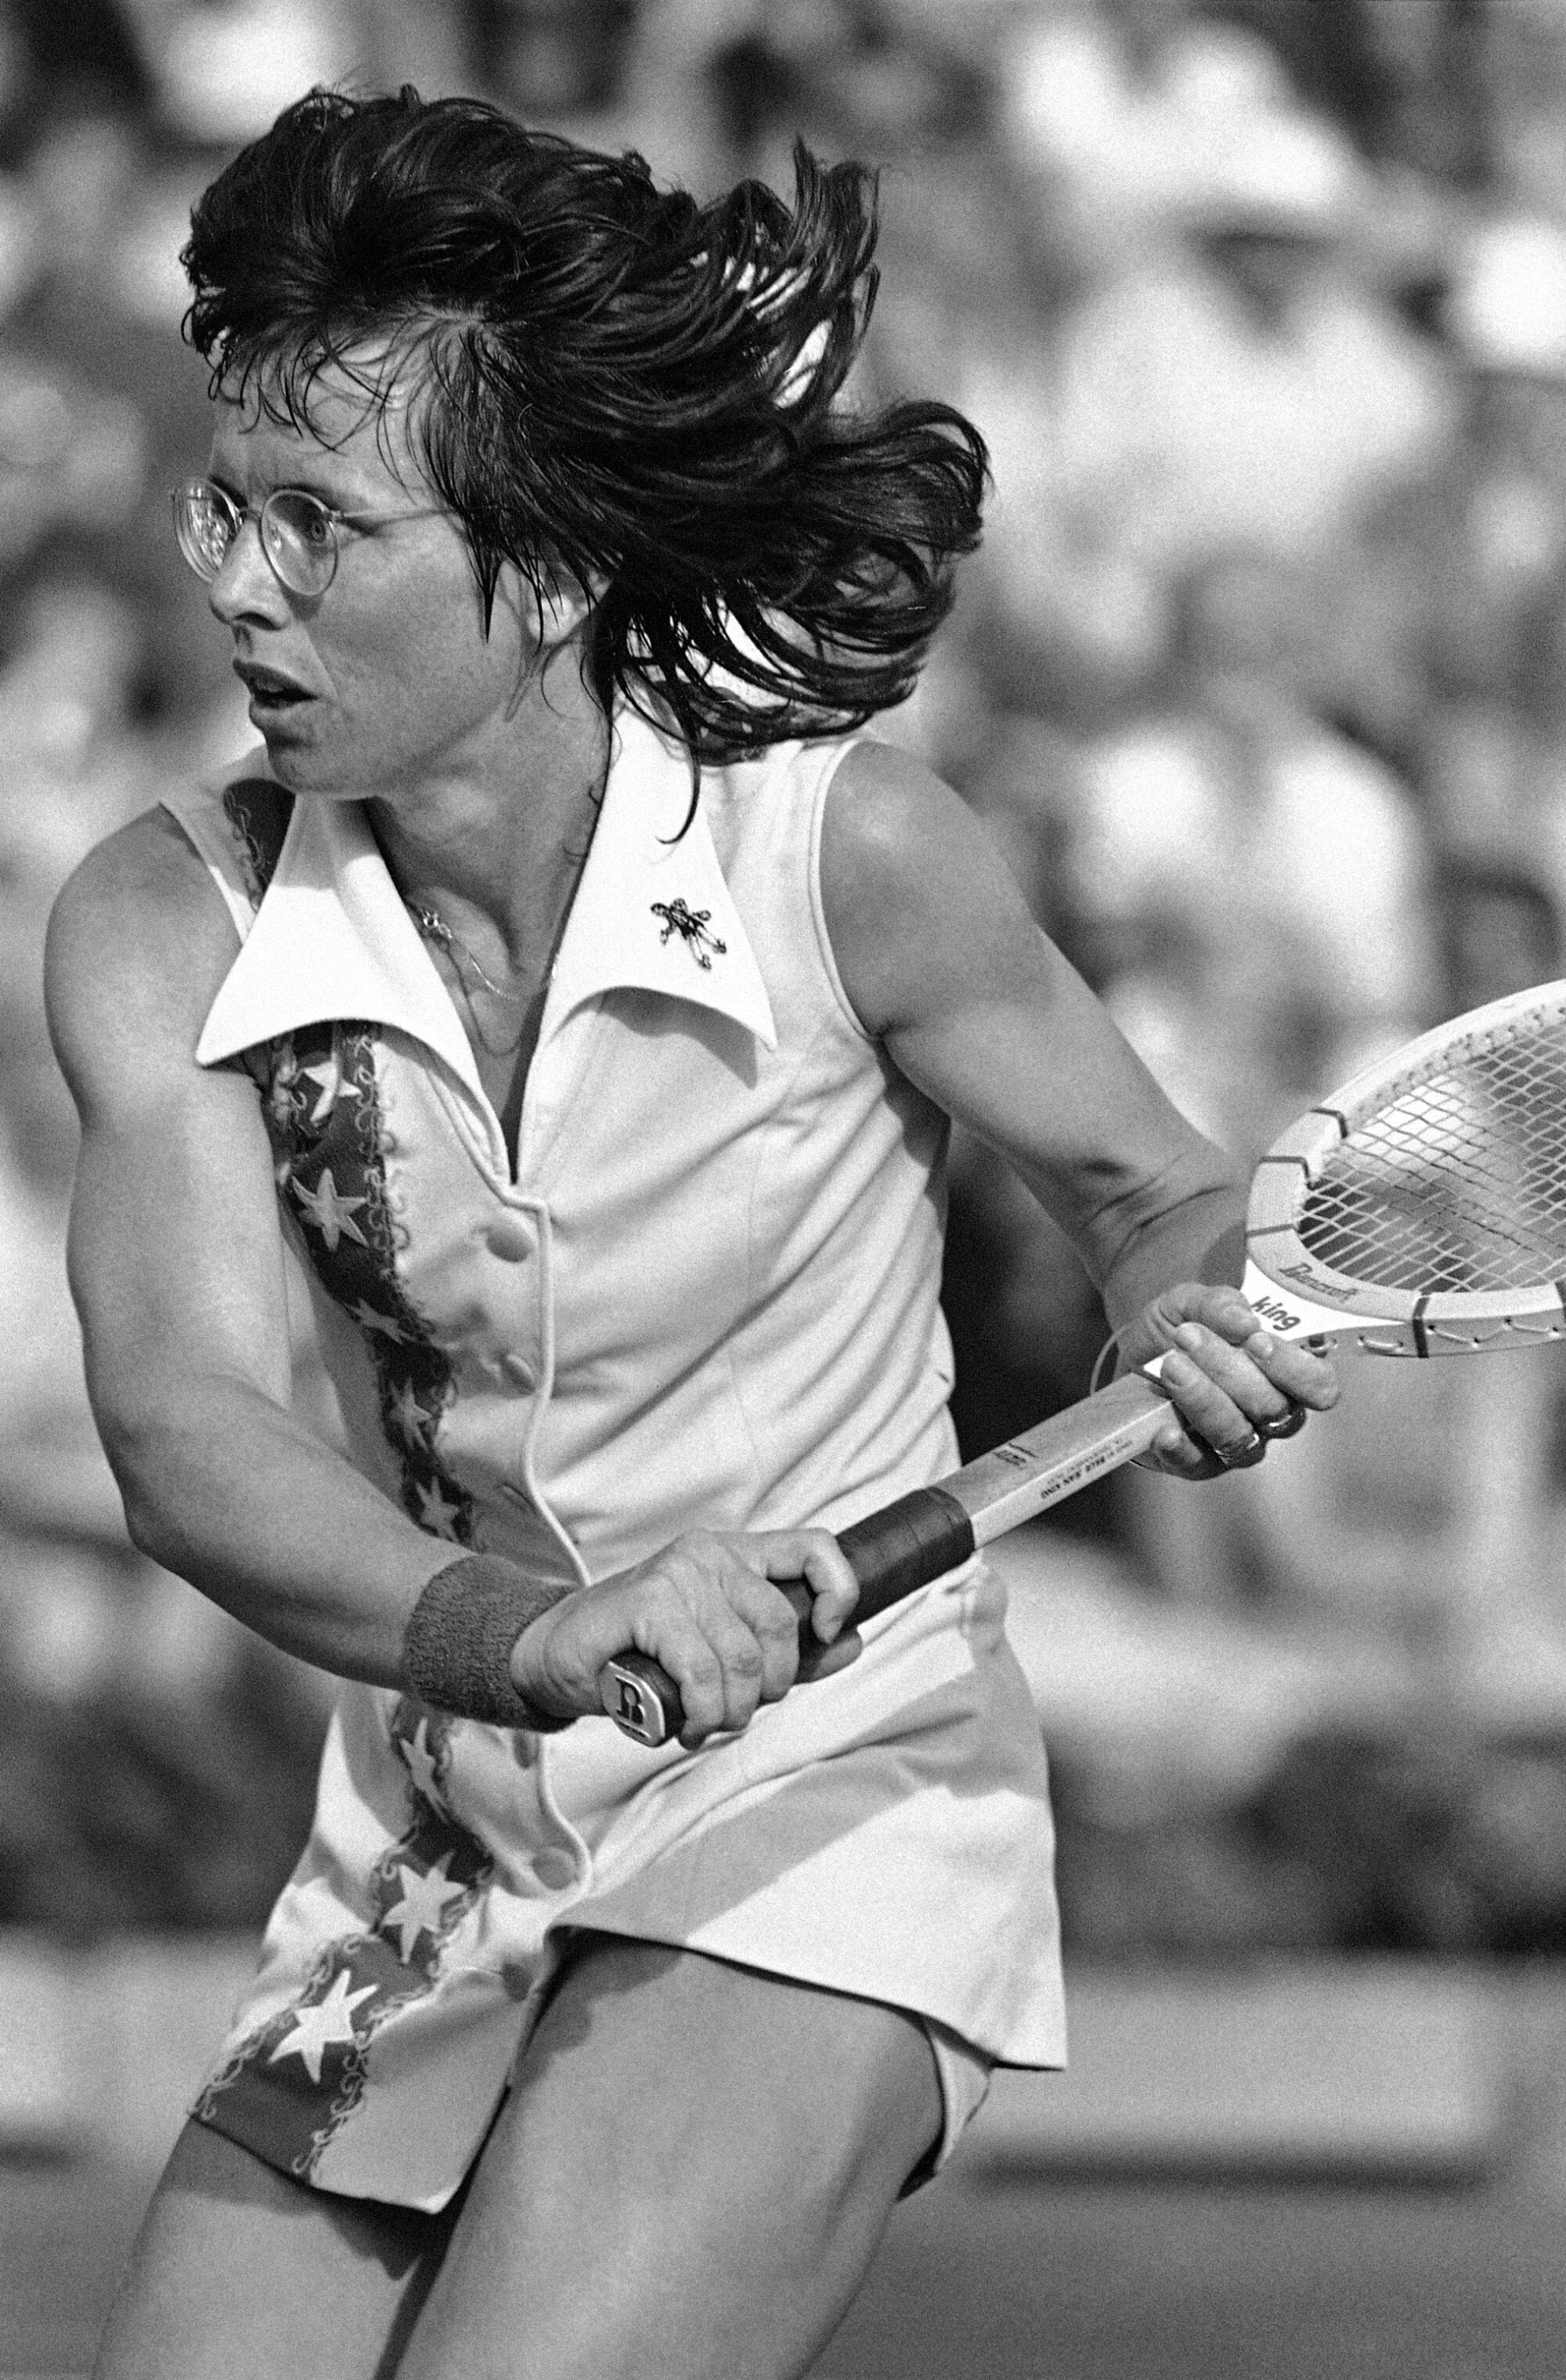 Billie Jean King during a match in 1977.